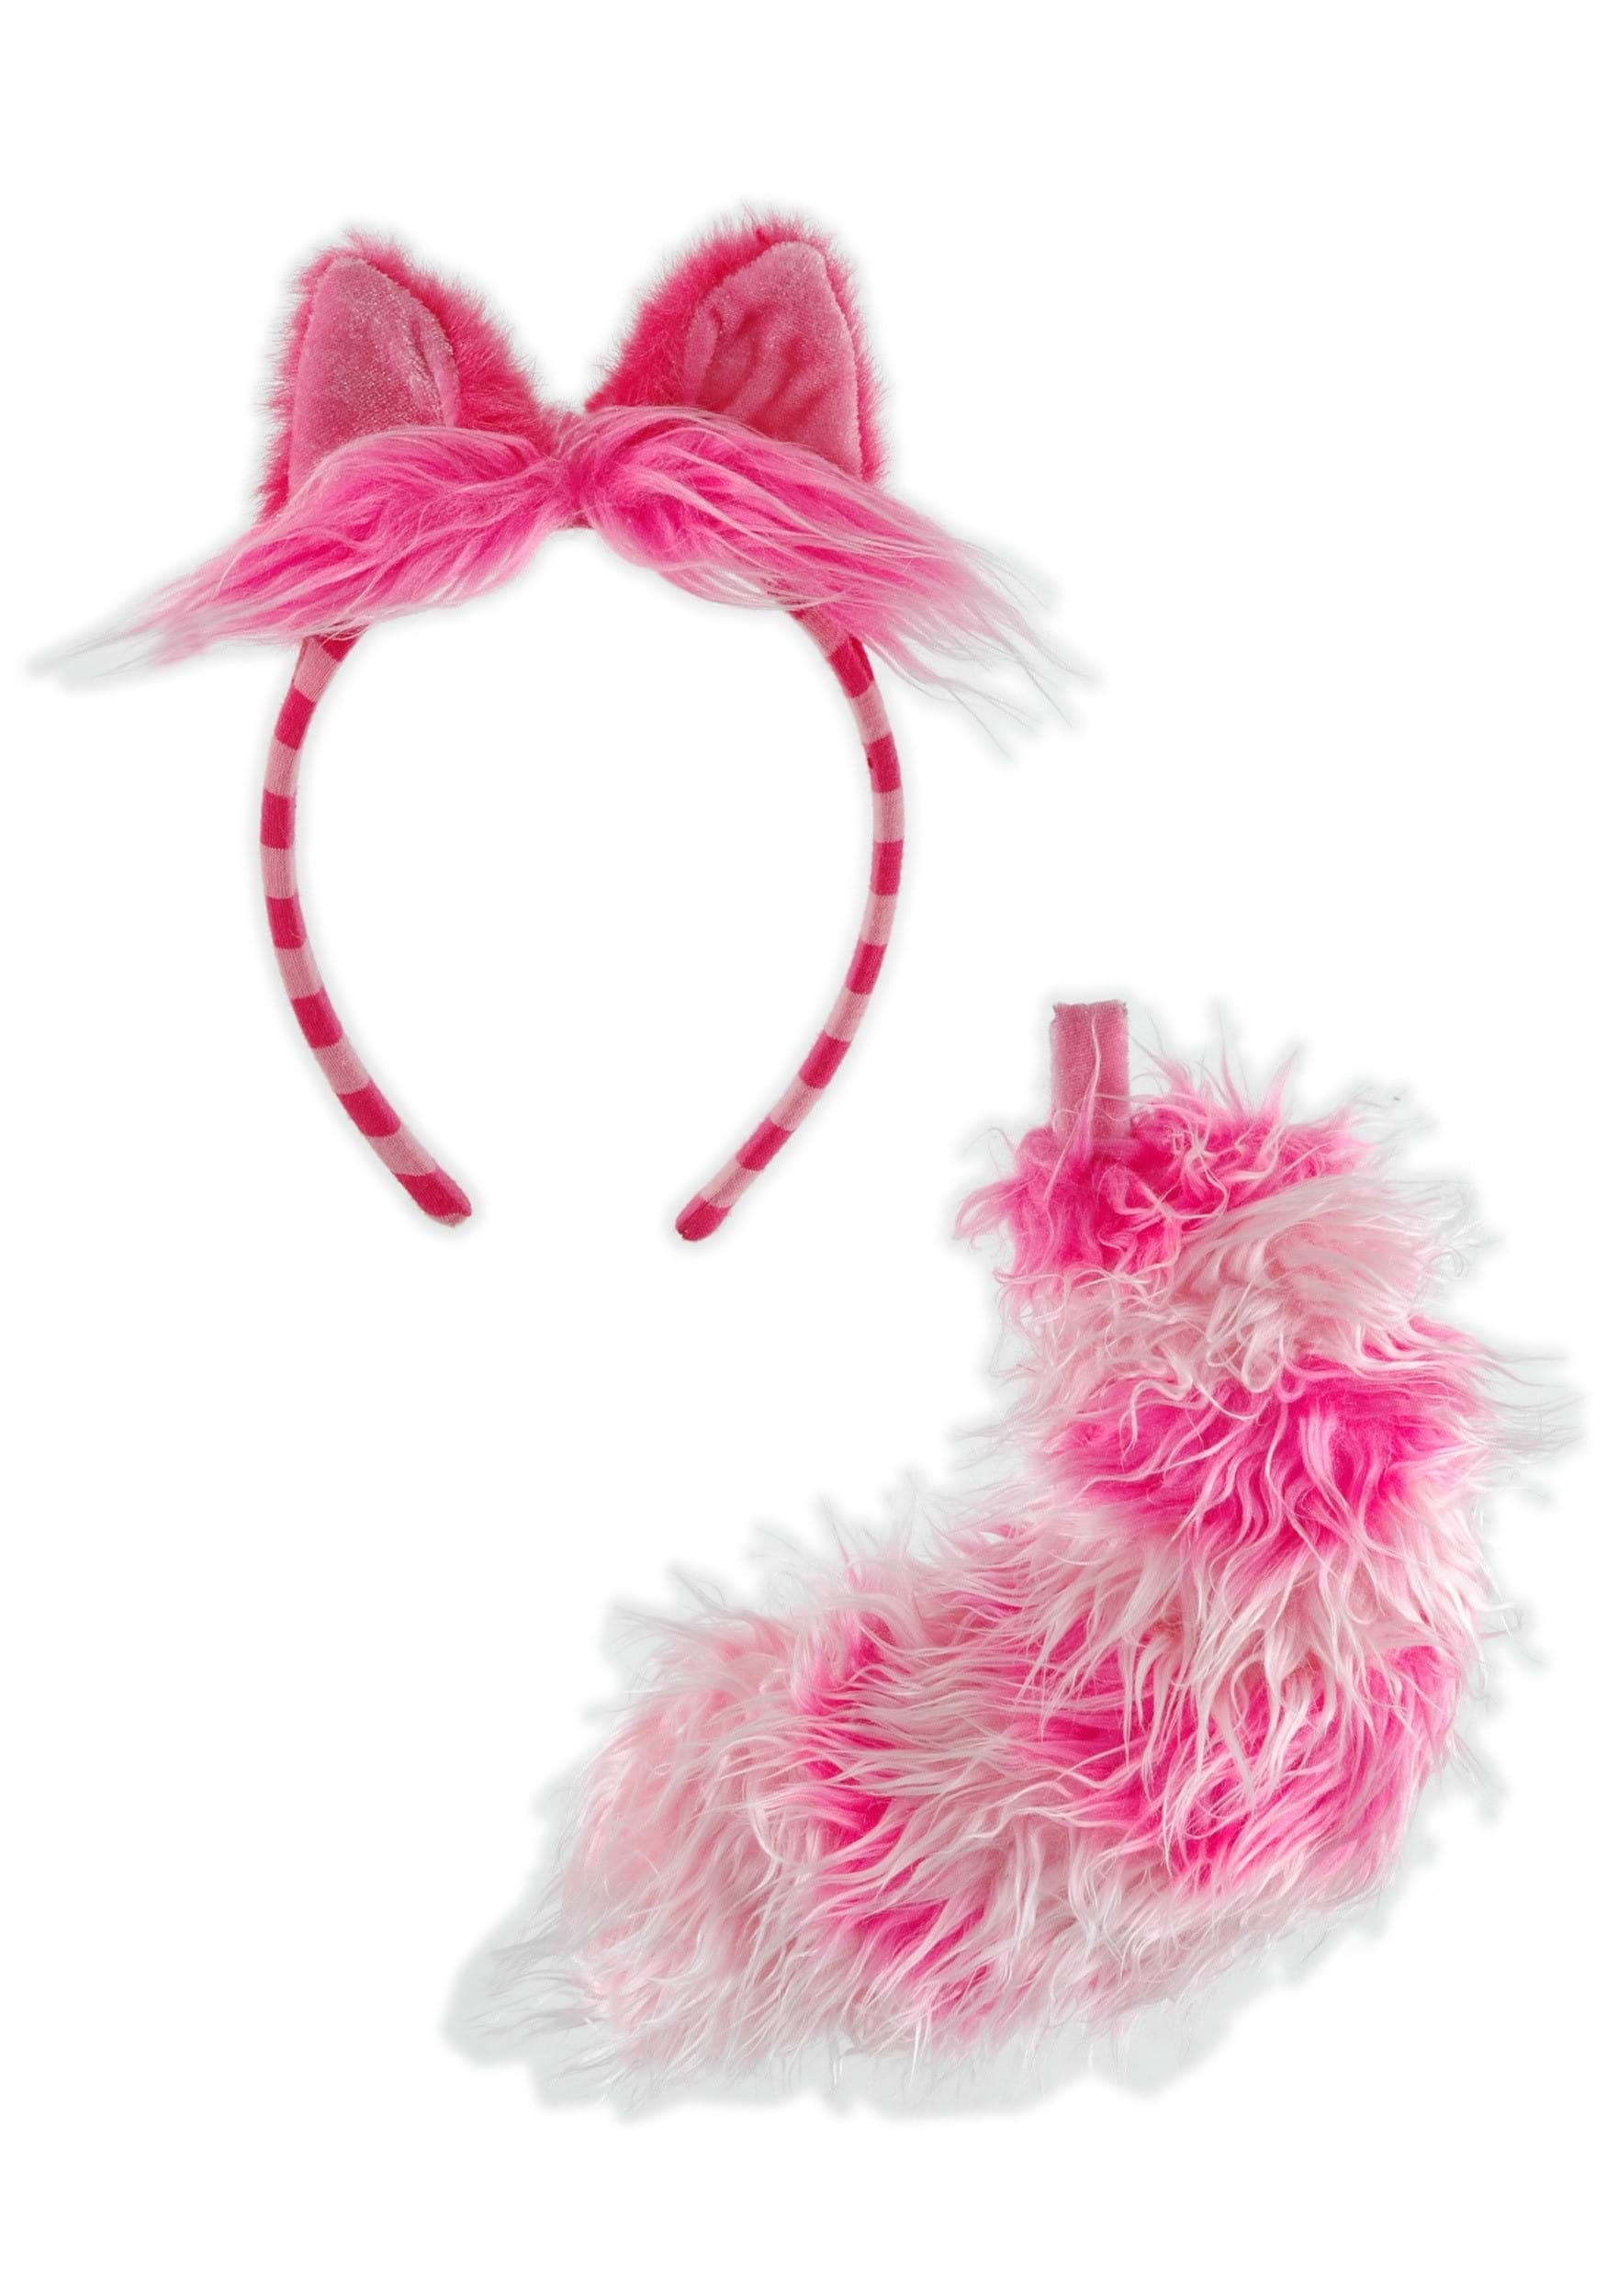 Pink Cheshire Cat Ears and Tail from Alice in Wonderland